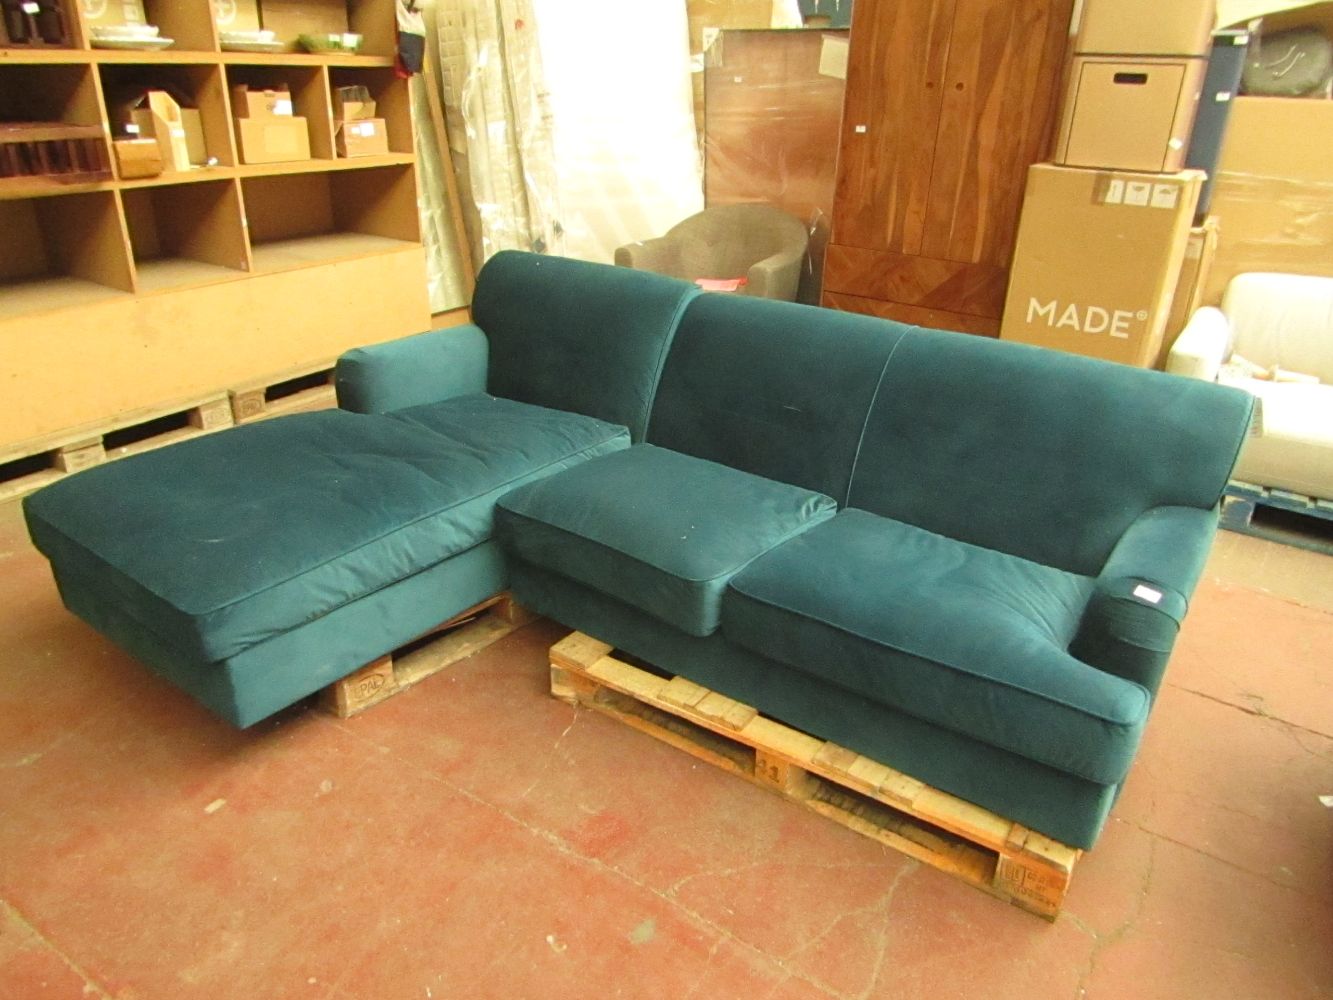 Tuesday Furniture Sale with Items from La Redoute, Made, Cox & Cox, Swoon & More